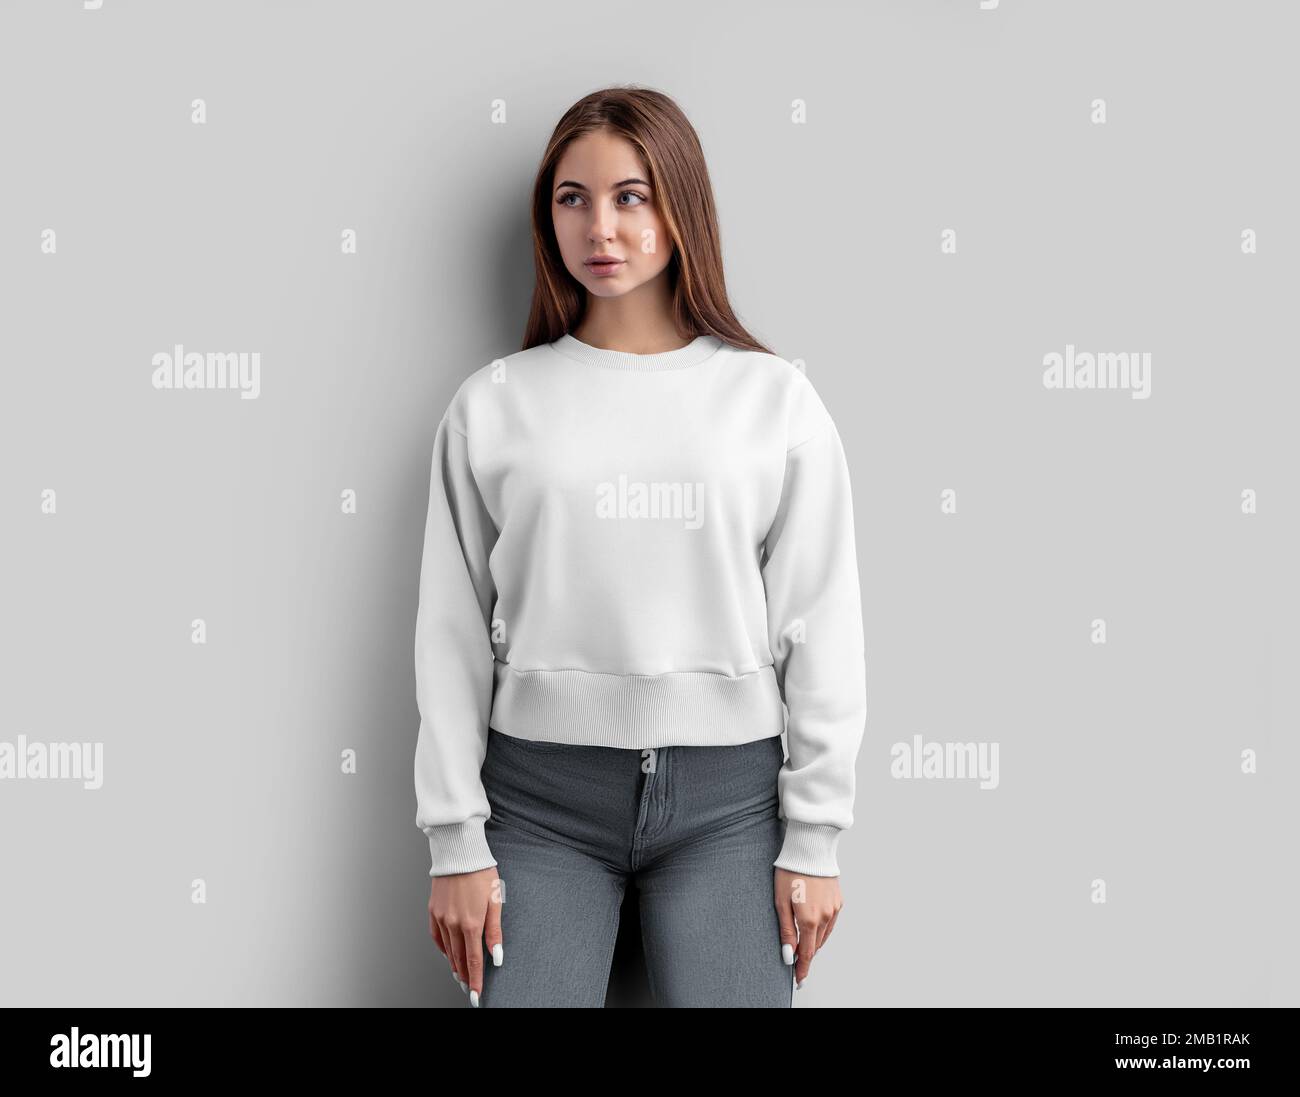 Mockup of a white female sweatshirt, a shirt on a girl in gray jeans, isolated on a background, front. Template of fashion empty crop clothes, longsle Stock Photo